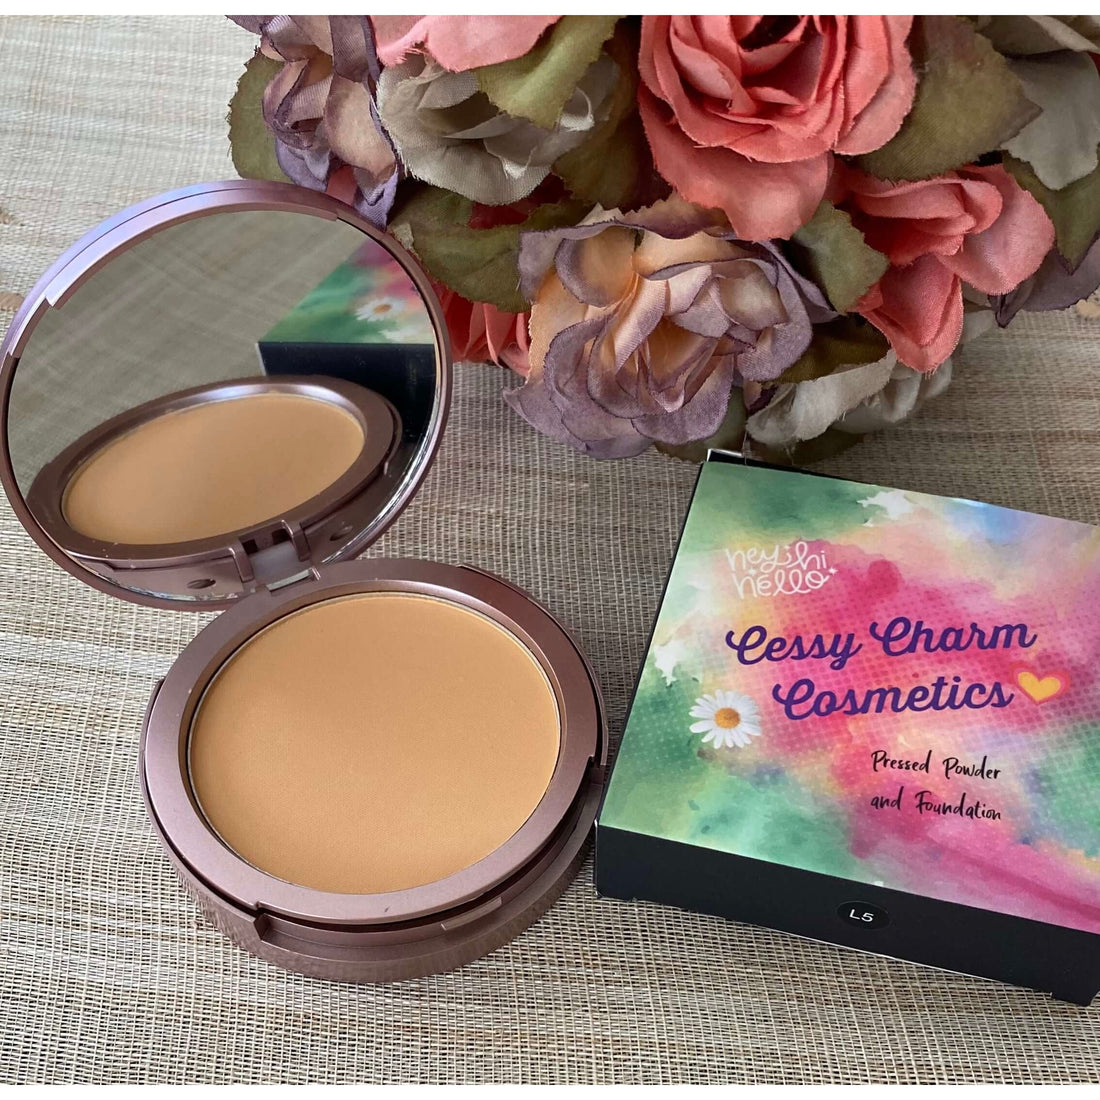 Pressed Powder and Foundation Compact - Cessy Charm Cosmetics